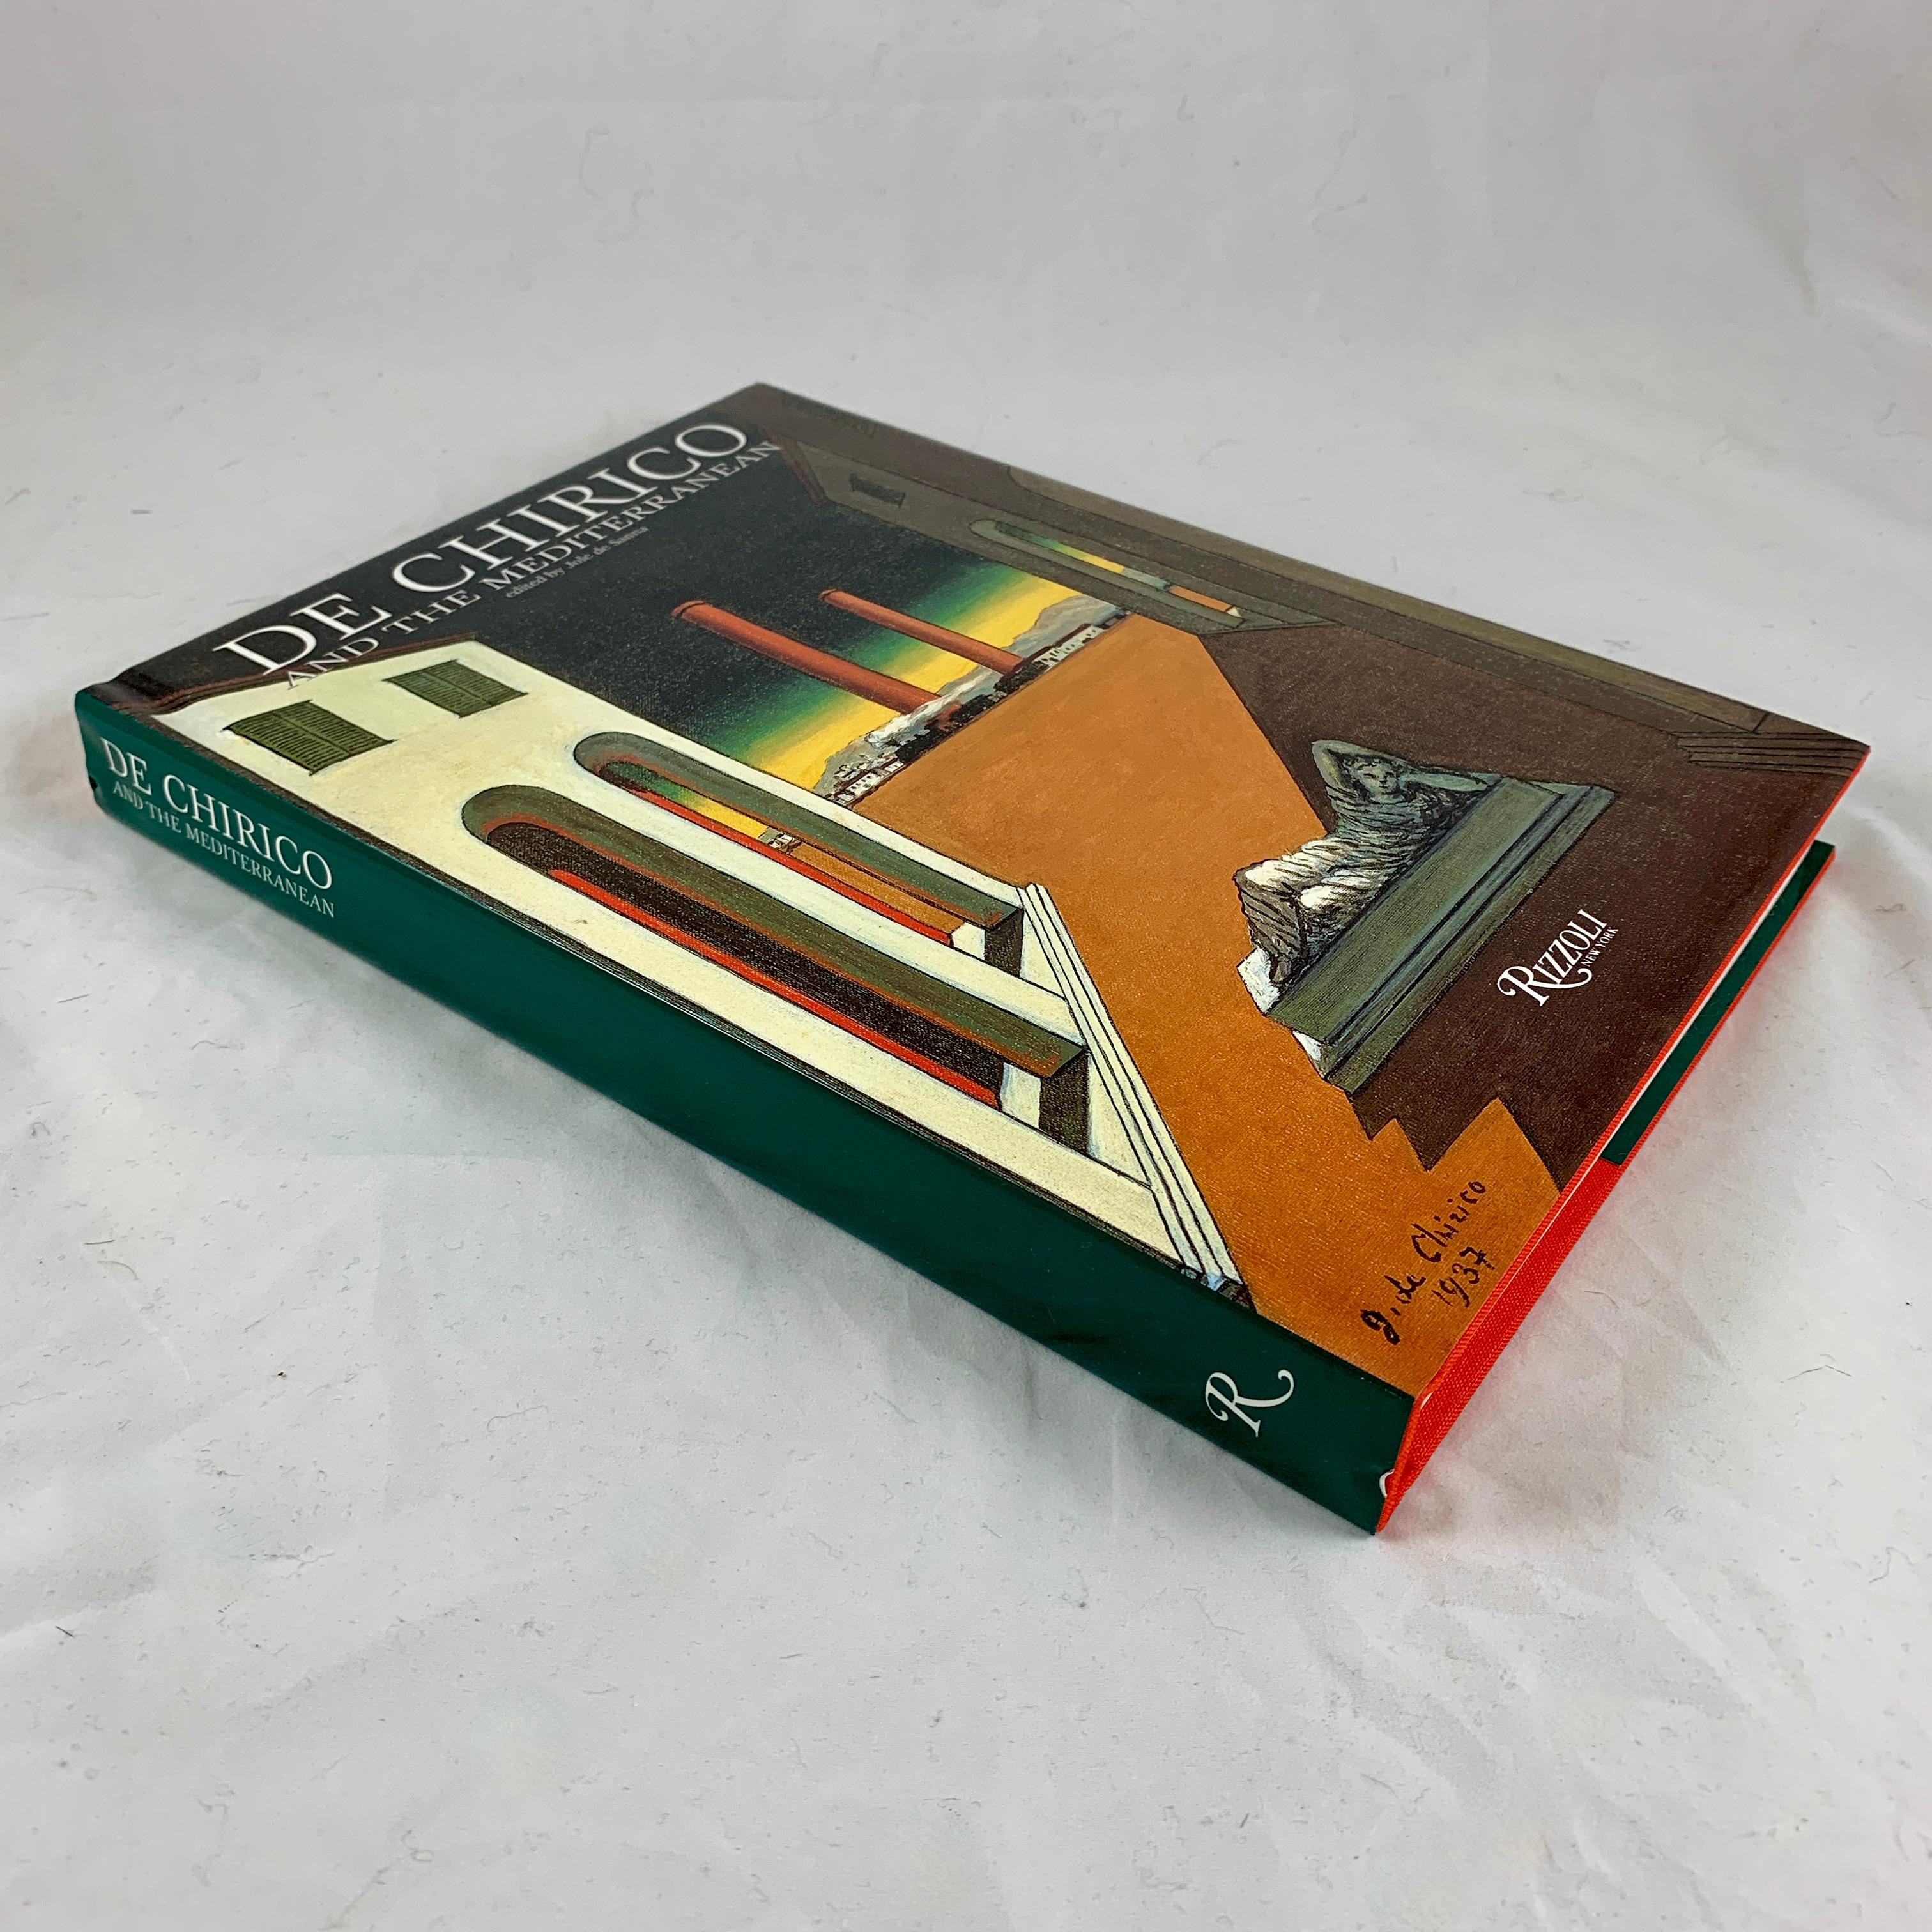 The Greek-born Italian painter Giorgio de Chirico (1888-1978) was a master of metaphysical painting. His use of fantastic and dream imagery creates a surreal, sometimes disturbing landscape. This fully illustrated catalogue, published on the